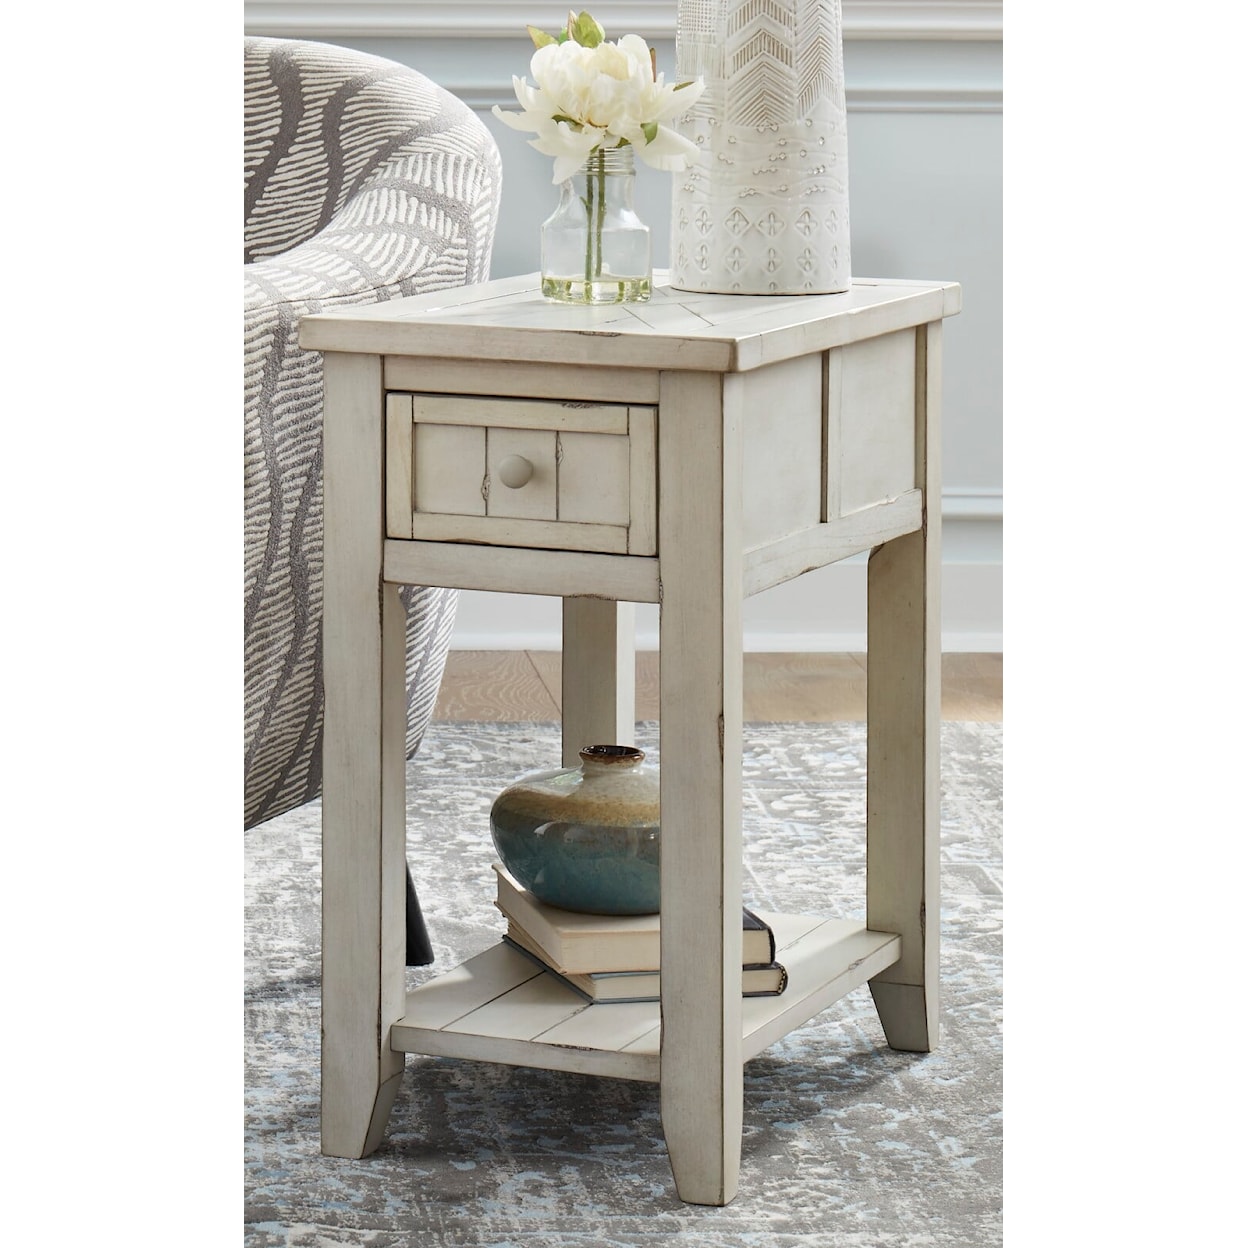 Null Furniture Door Country Chairside End Table